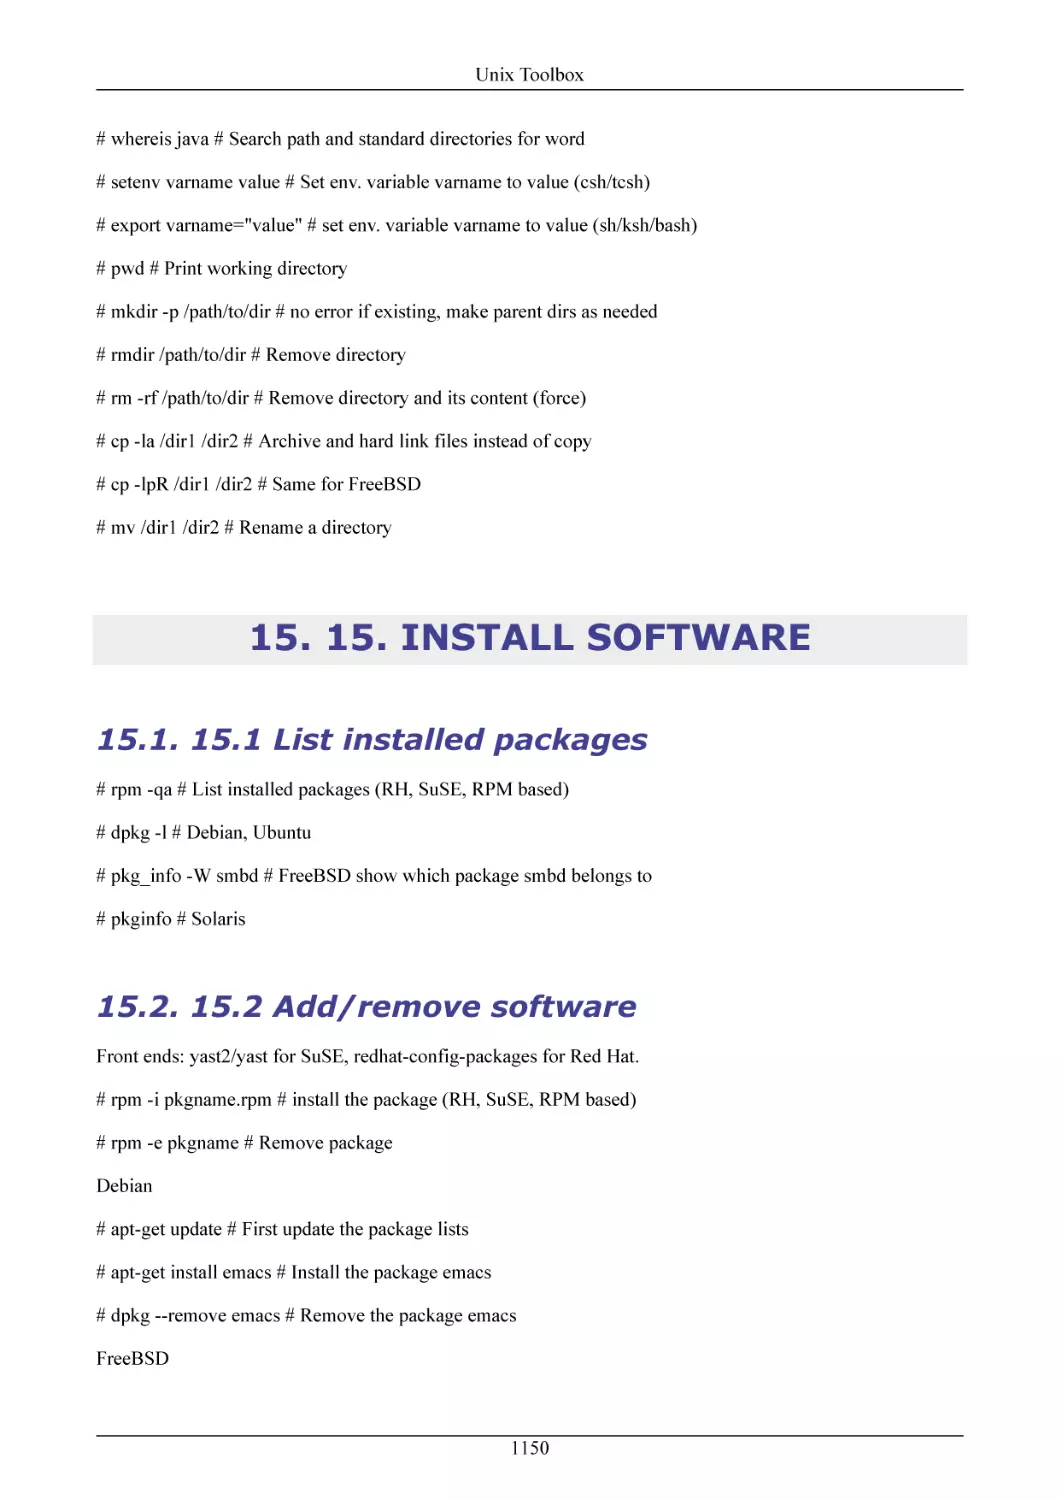 15. INSTALL SOFTWARE
15.1 List installed packages
15.2 Add/remove software